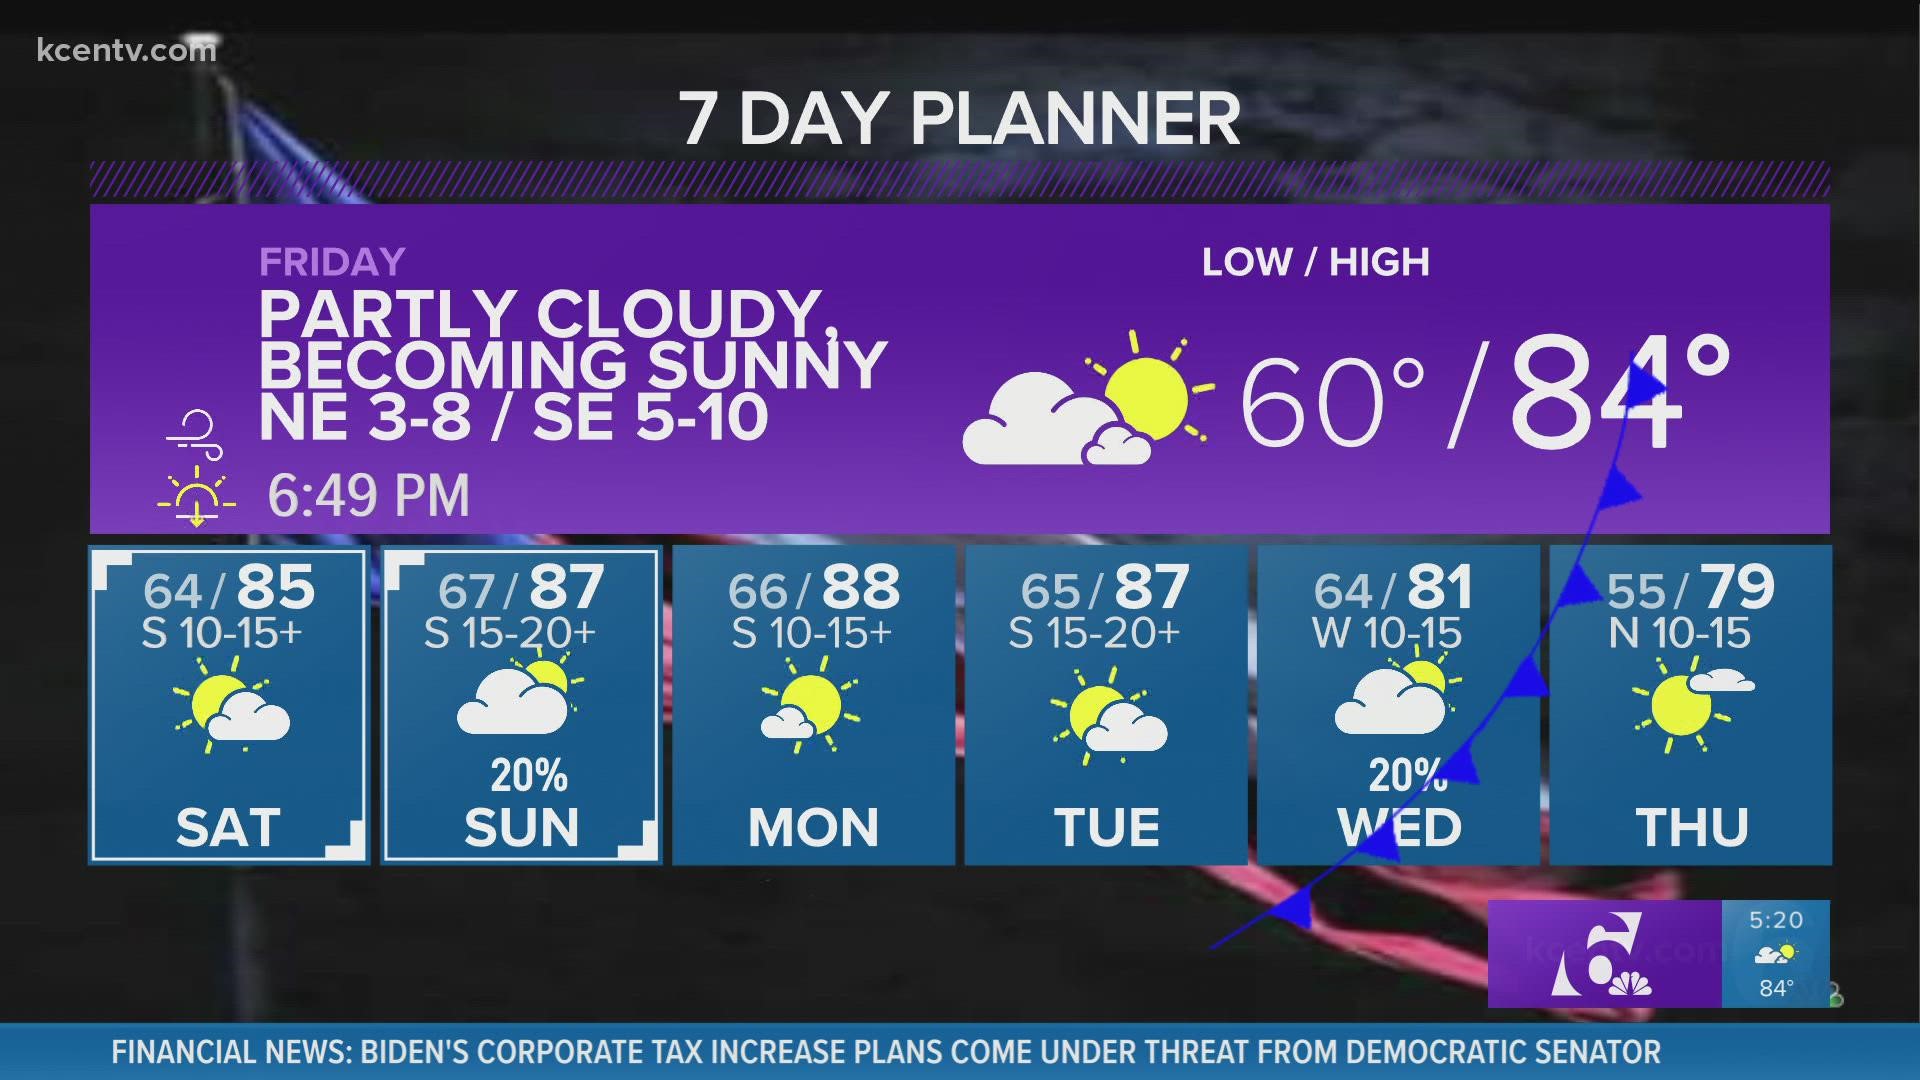 Mid to upper 80s return to the forecast for the weekend and early next week before rain chances return midweek.